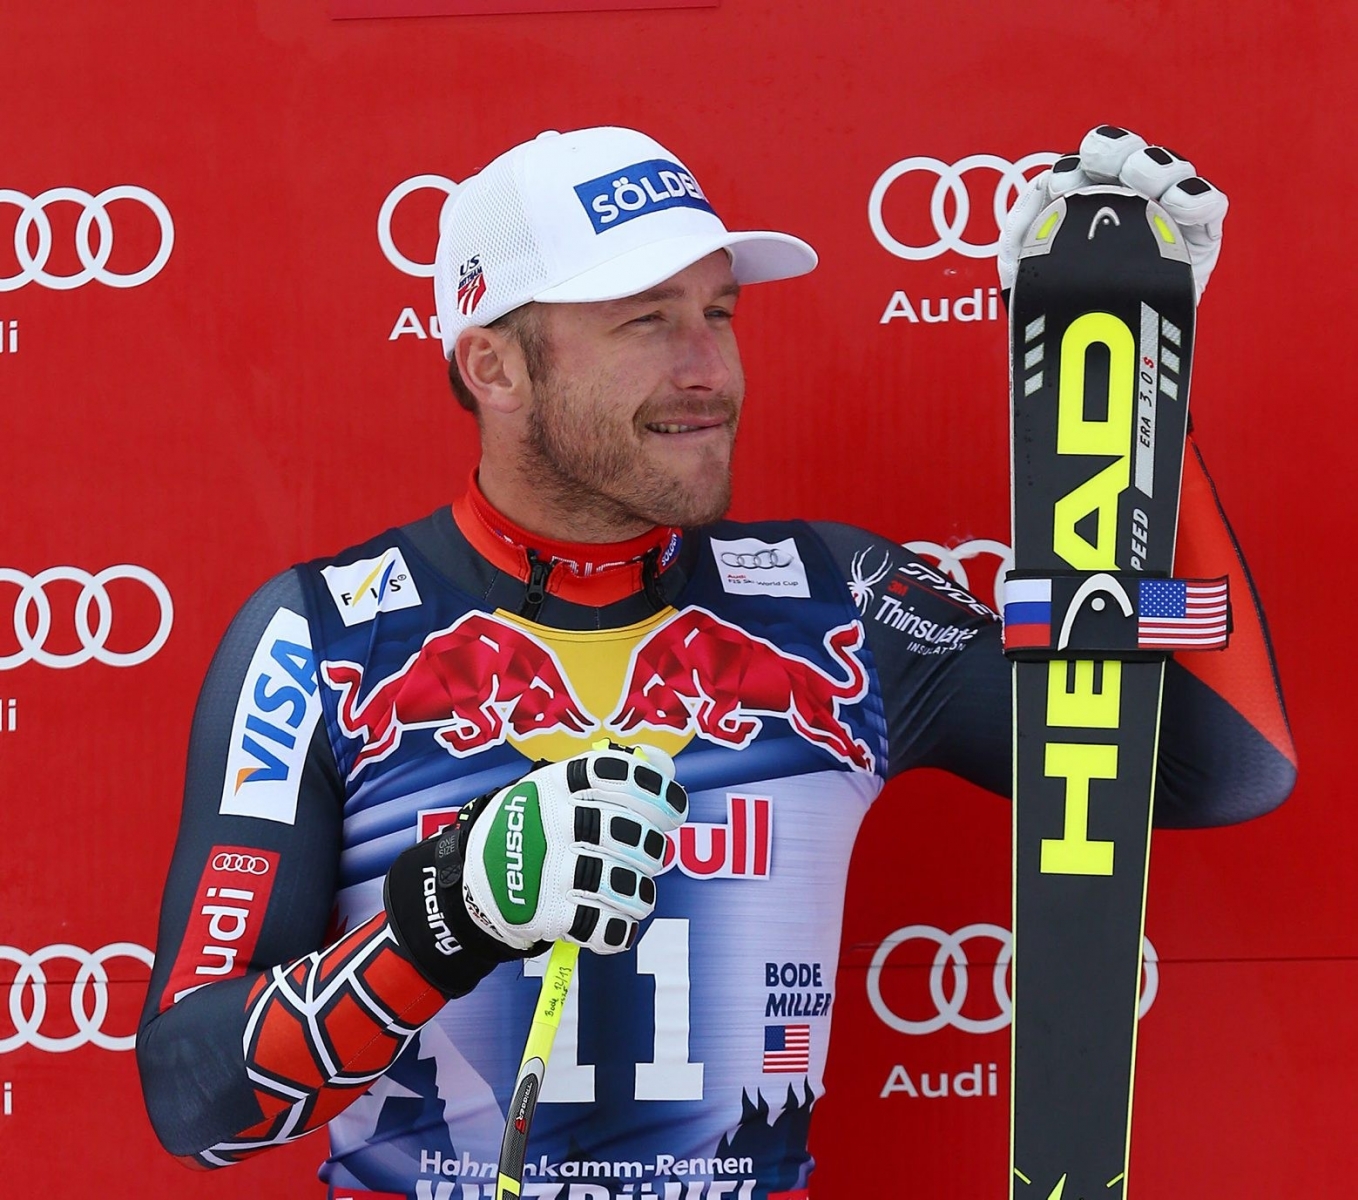 FILE - In this Jan. 25, 2014, file photo, third placed Bode Miller celebrates at the end of an alpine ski, men's World Cup downhill, in Kitzbuehel, Austria. Austrian-based ski manufacturer Head said Monday, Sept. 19, 2016, it has been sued by six-time Olympic medalist Bode Miller, who wants to resume World Cup racing with a different equipment supplier.  (AP Photo/Giovanni Auletta, File) Miller Ski Brands